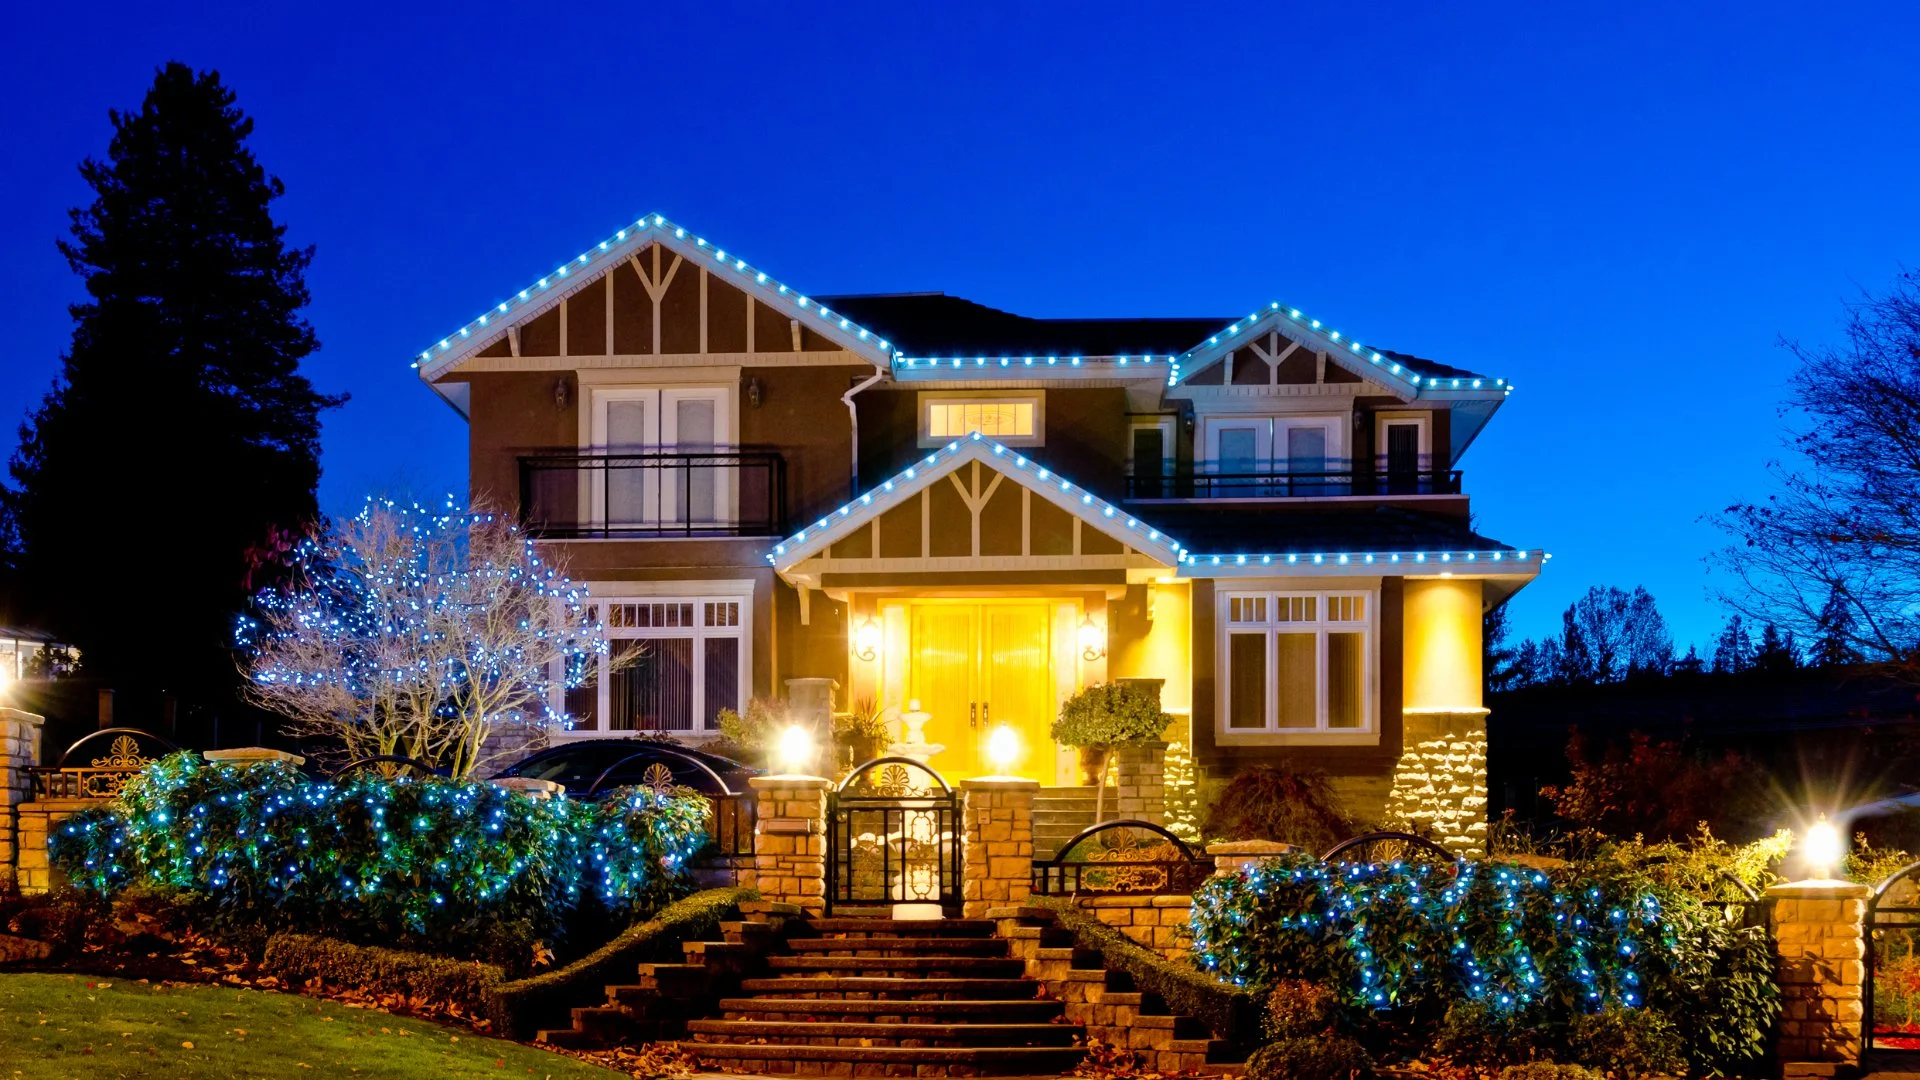 What to Expect From a Professional Holiday Lighting Consultation